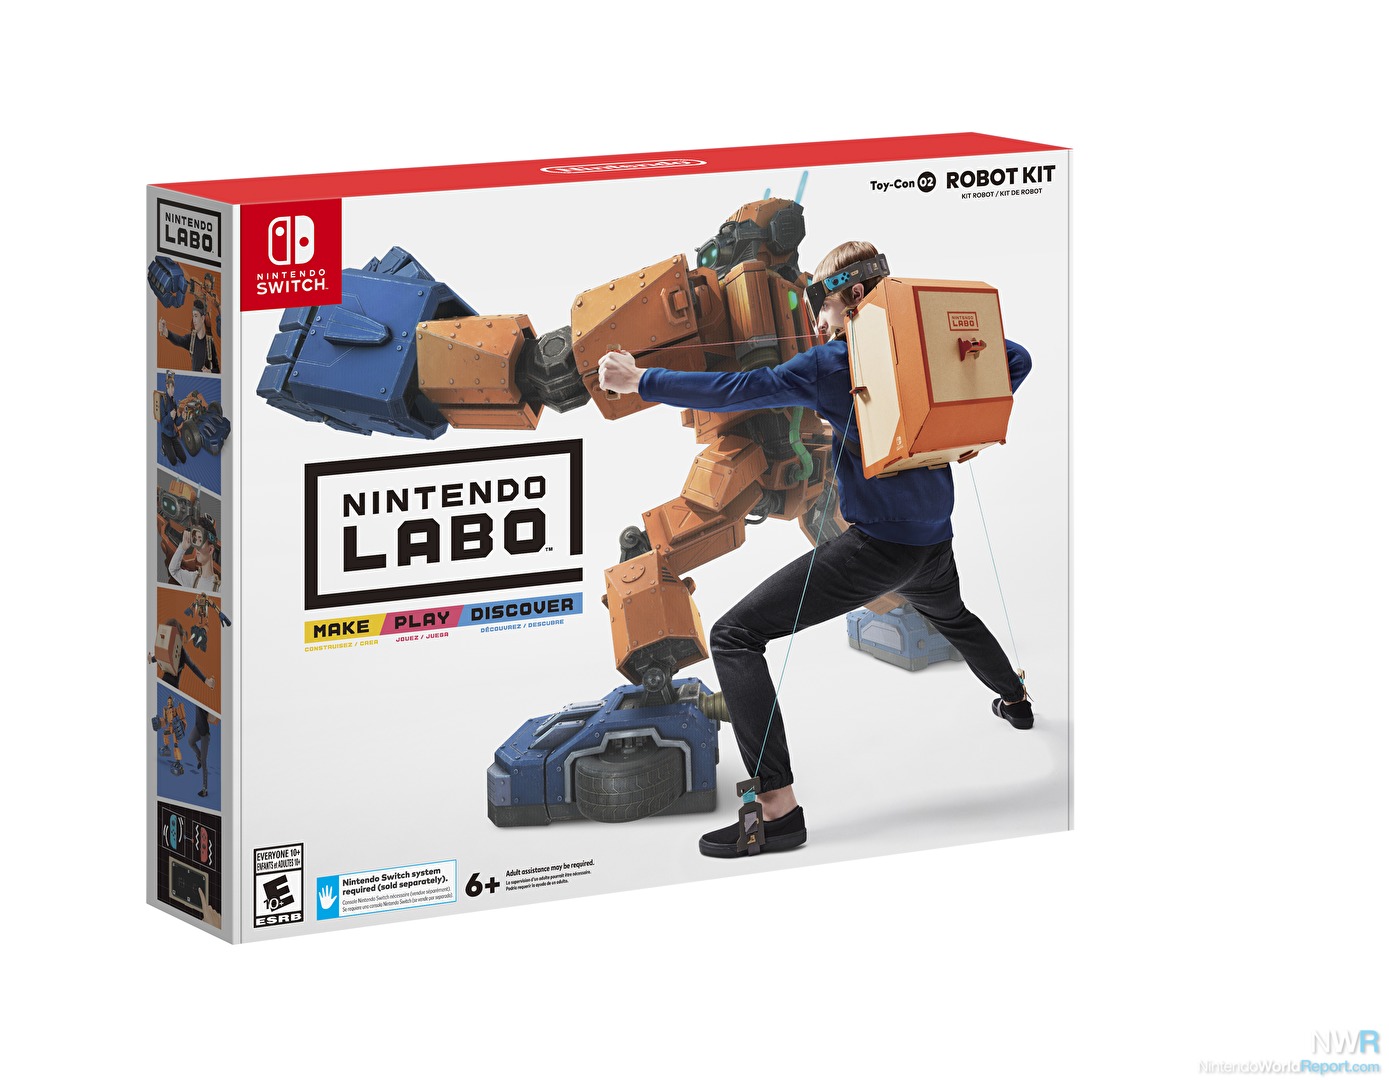 Nintendo Labo Toy-Con 02 Robot Kit Review - Review - Nintendo World Report